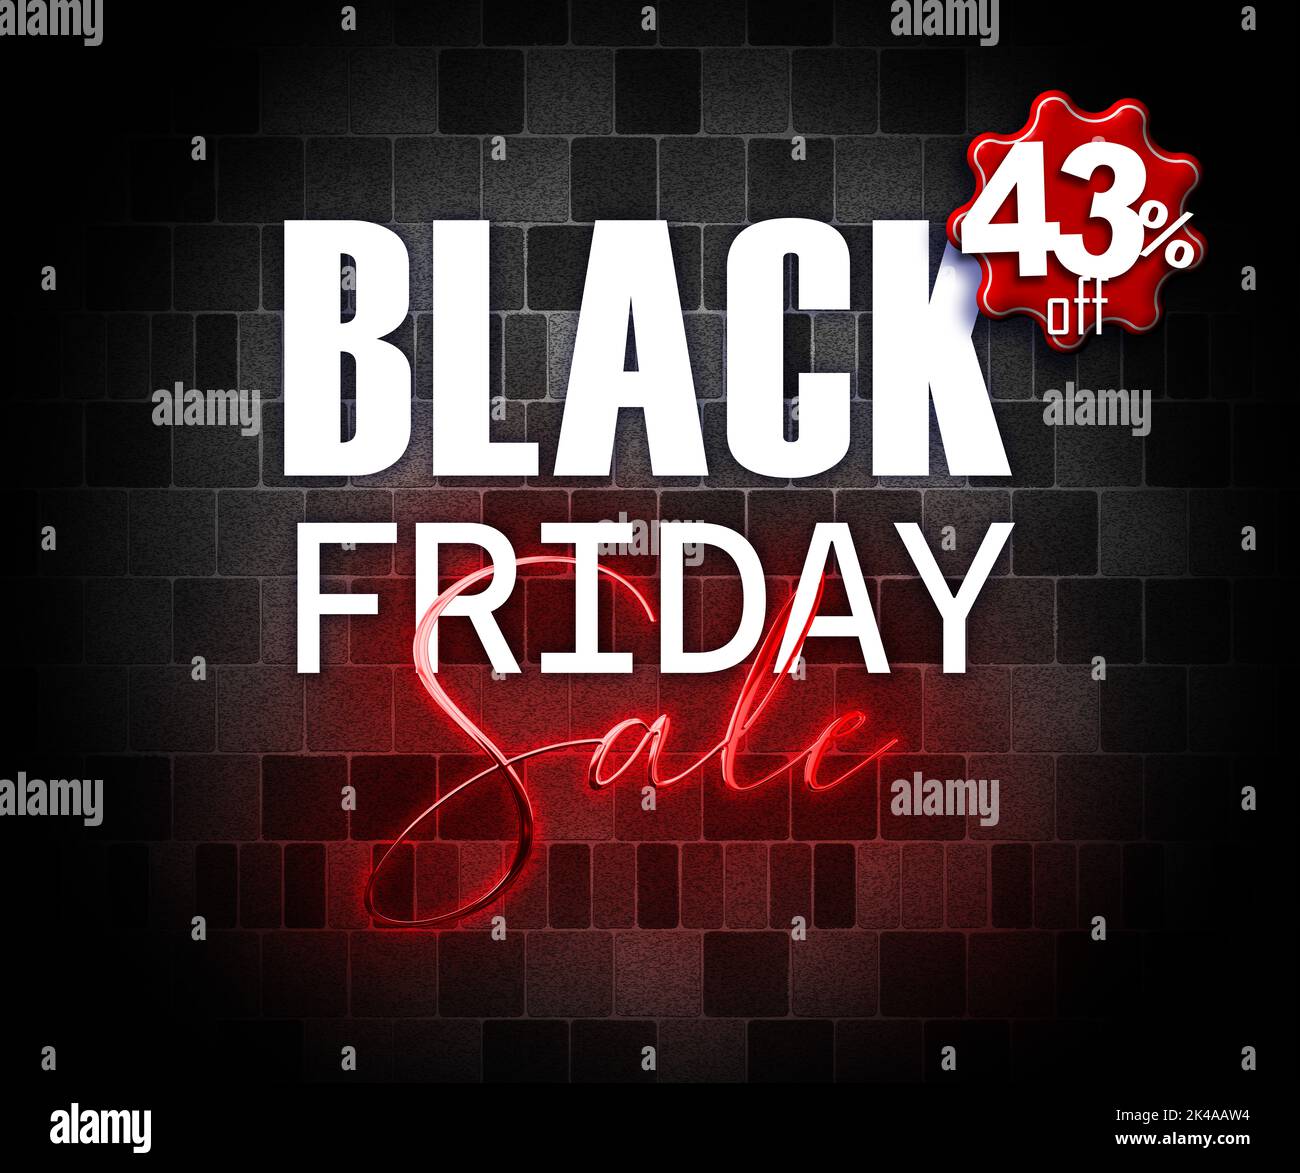 illustration with 3d elements black friday promotion banner 43 percent off sales increase Stock Photo